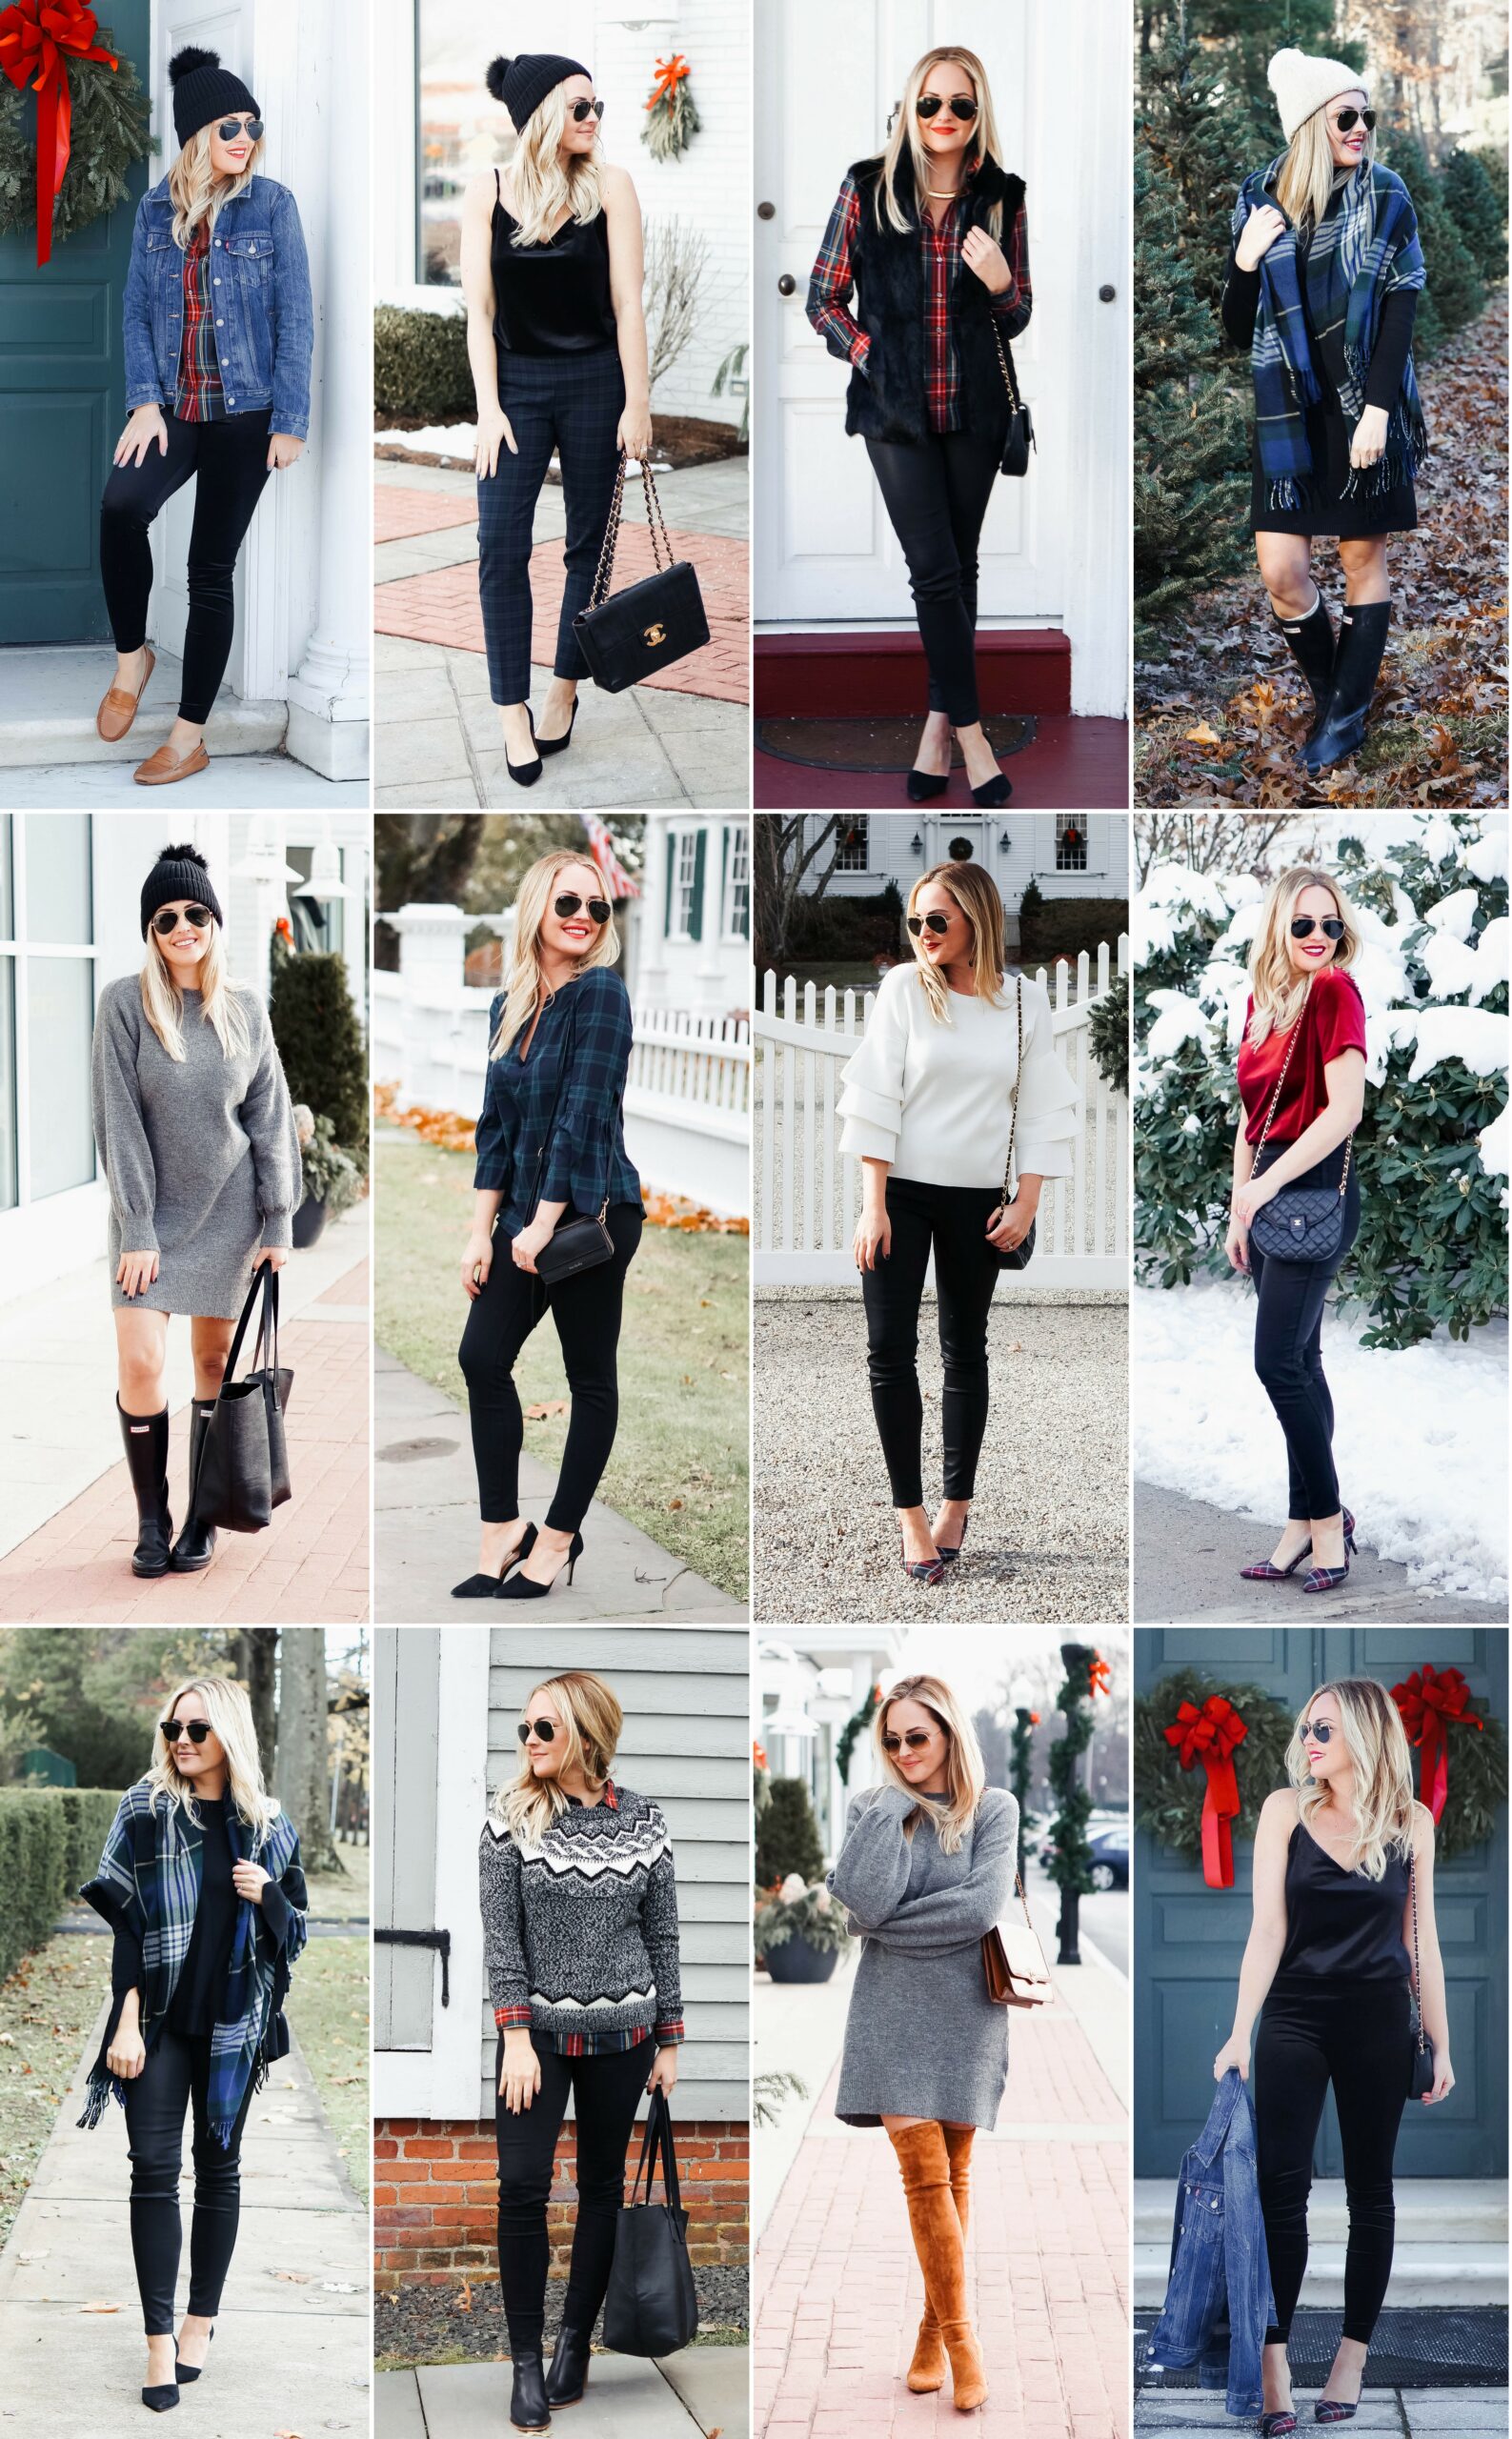 12 Classic Holiday Outfit Ideas